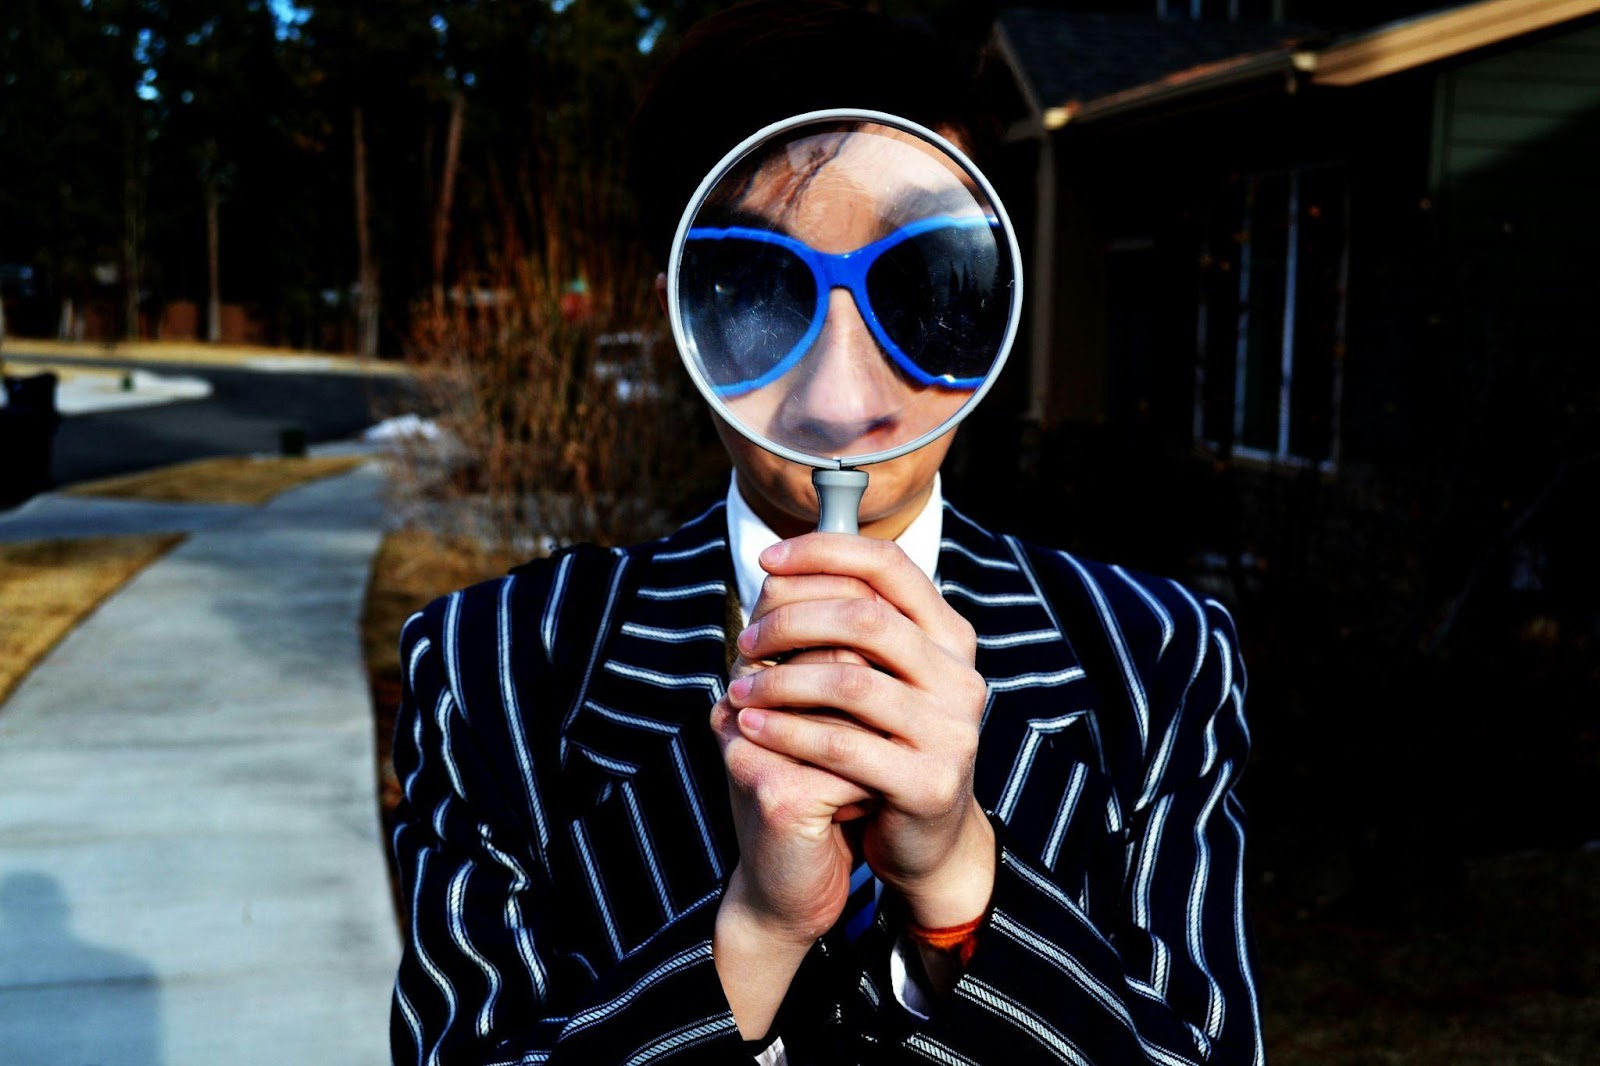 https://unsplash.com/photos/person-using-magnifying-glass-enlarging-the-appearance-of-his-nose-and-sunglasses-uAFjFsMS3YY